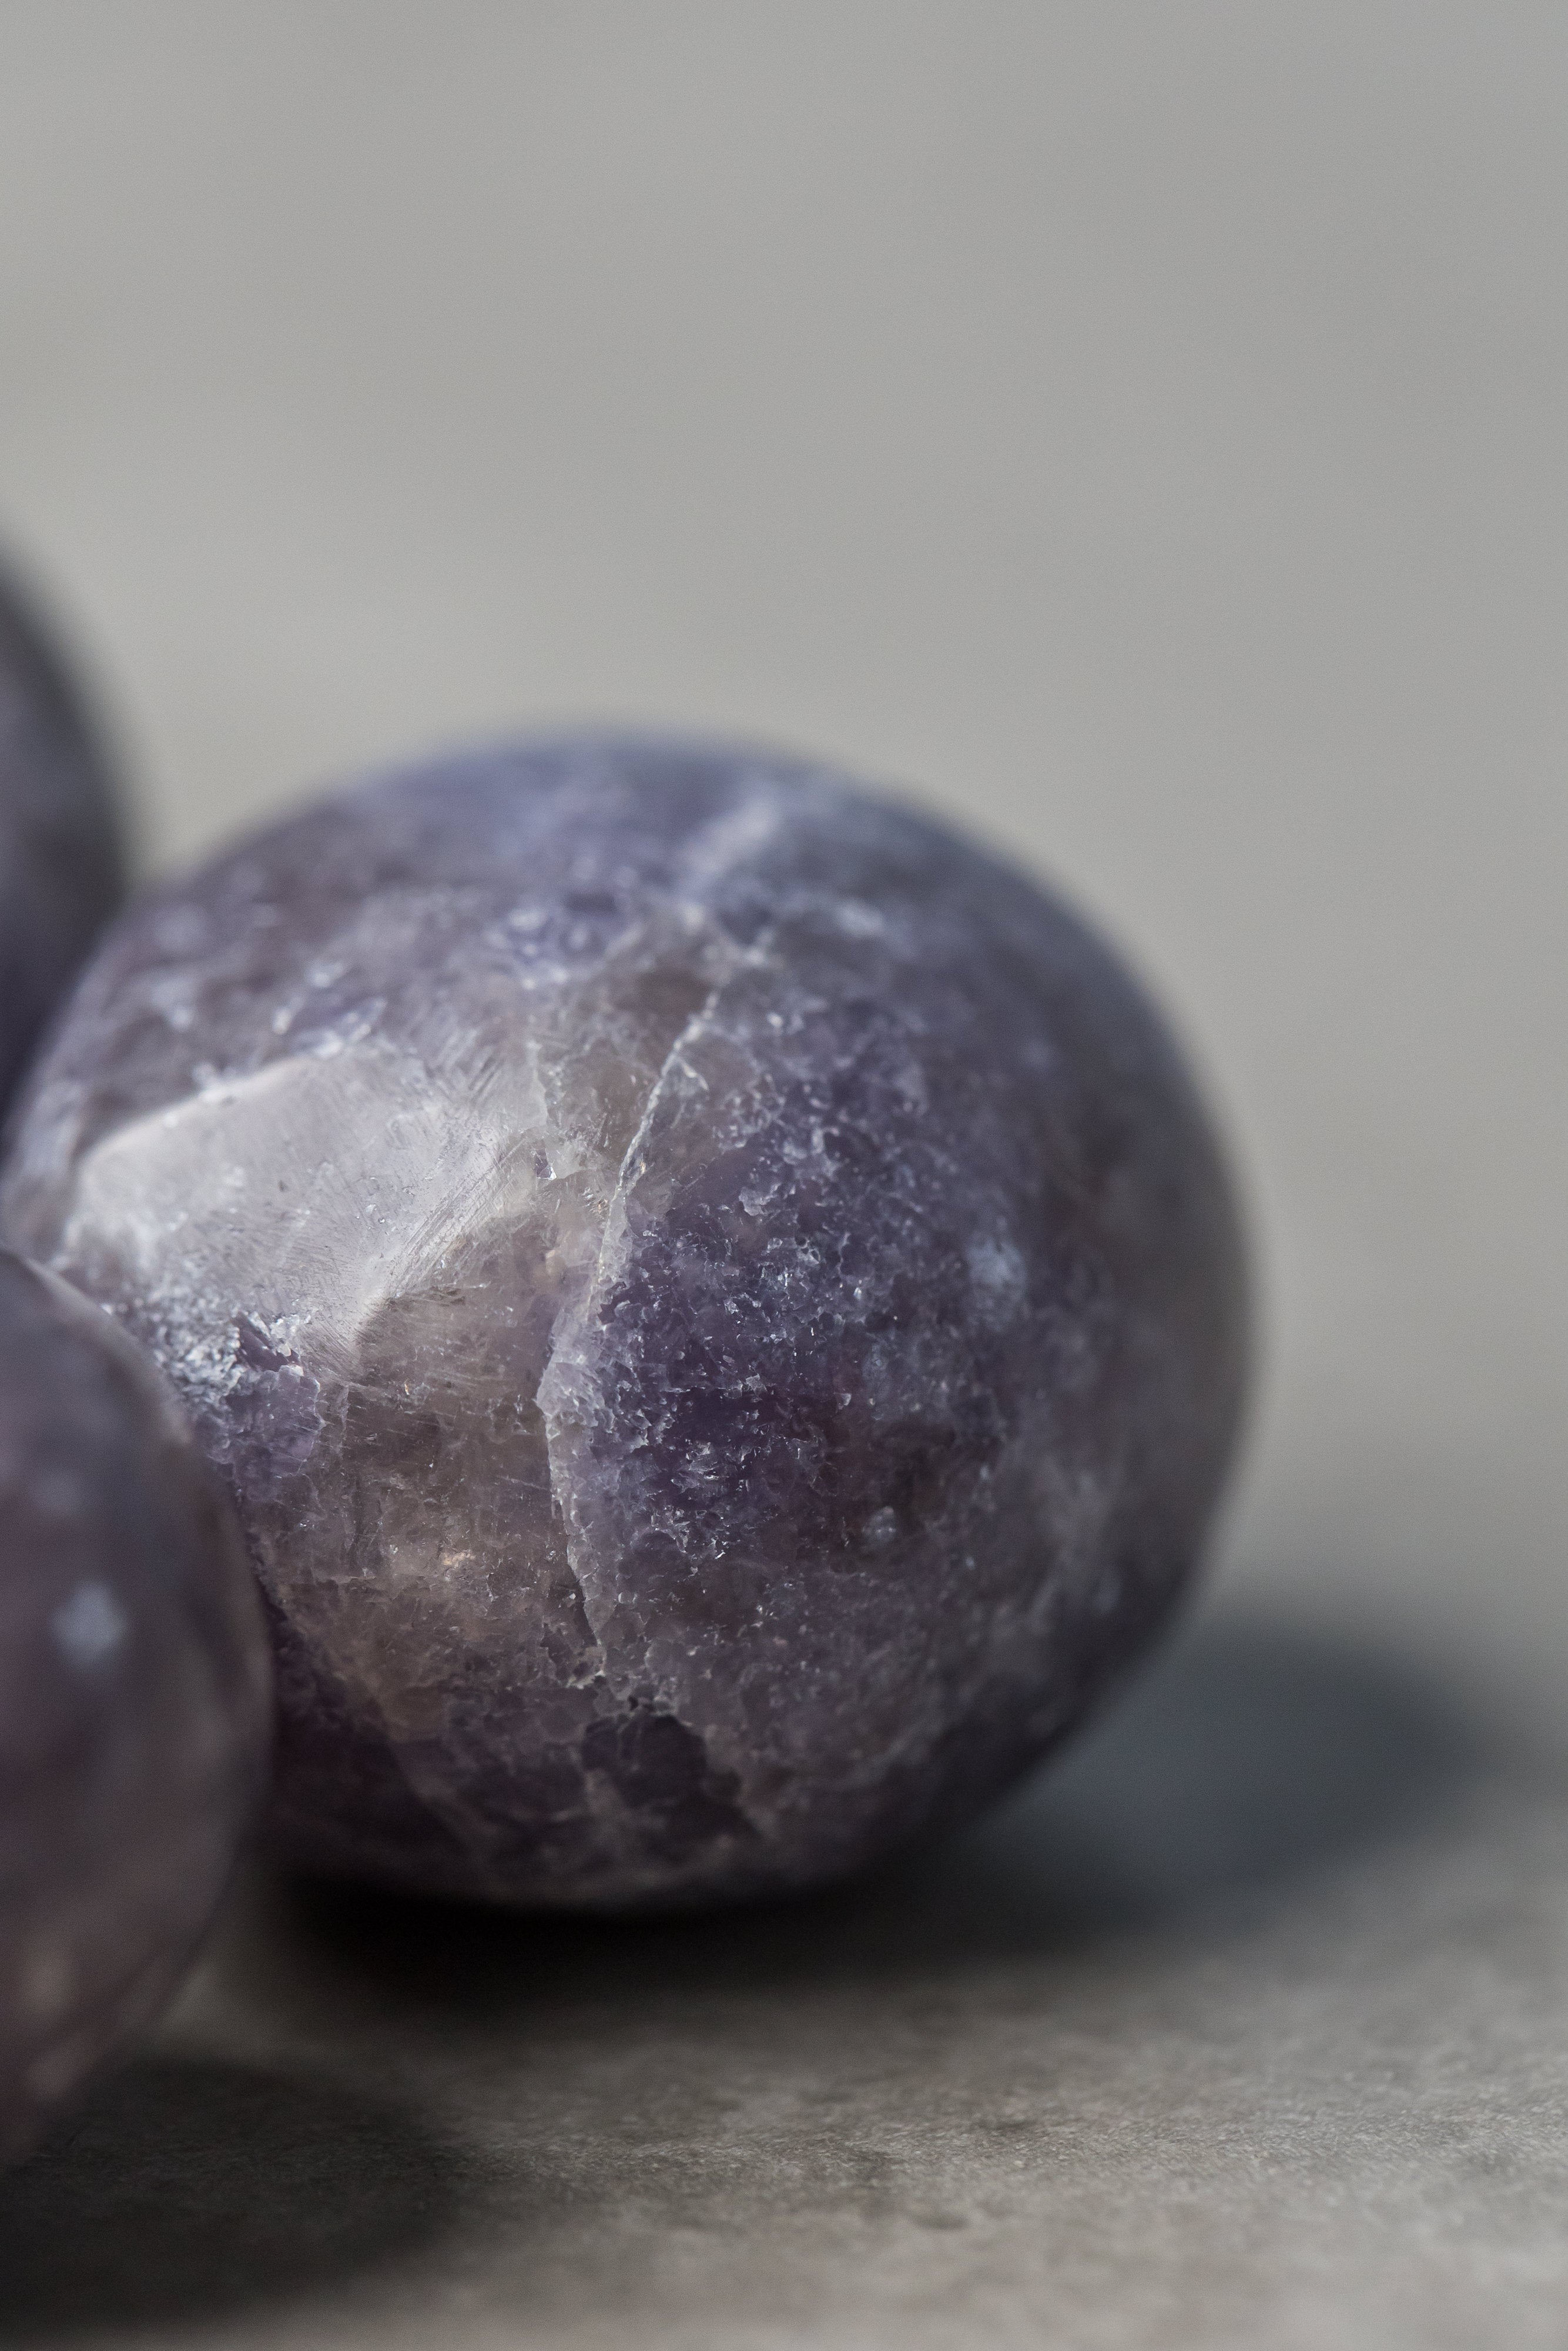 Unicorn Stone Small Spheres - Enchanting Crystal for Inspiration and Creativity - Everyday Rocks